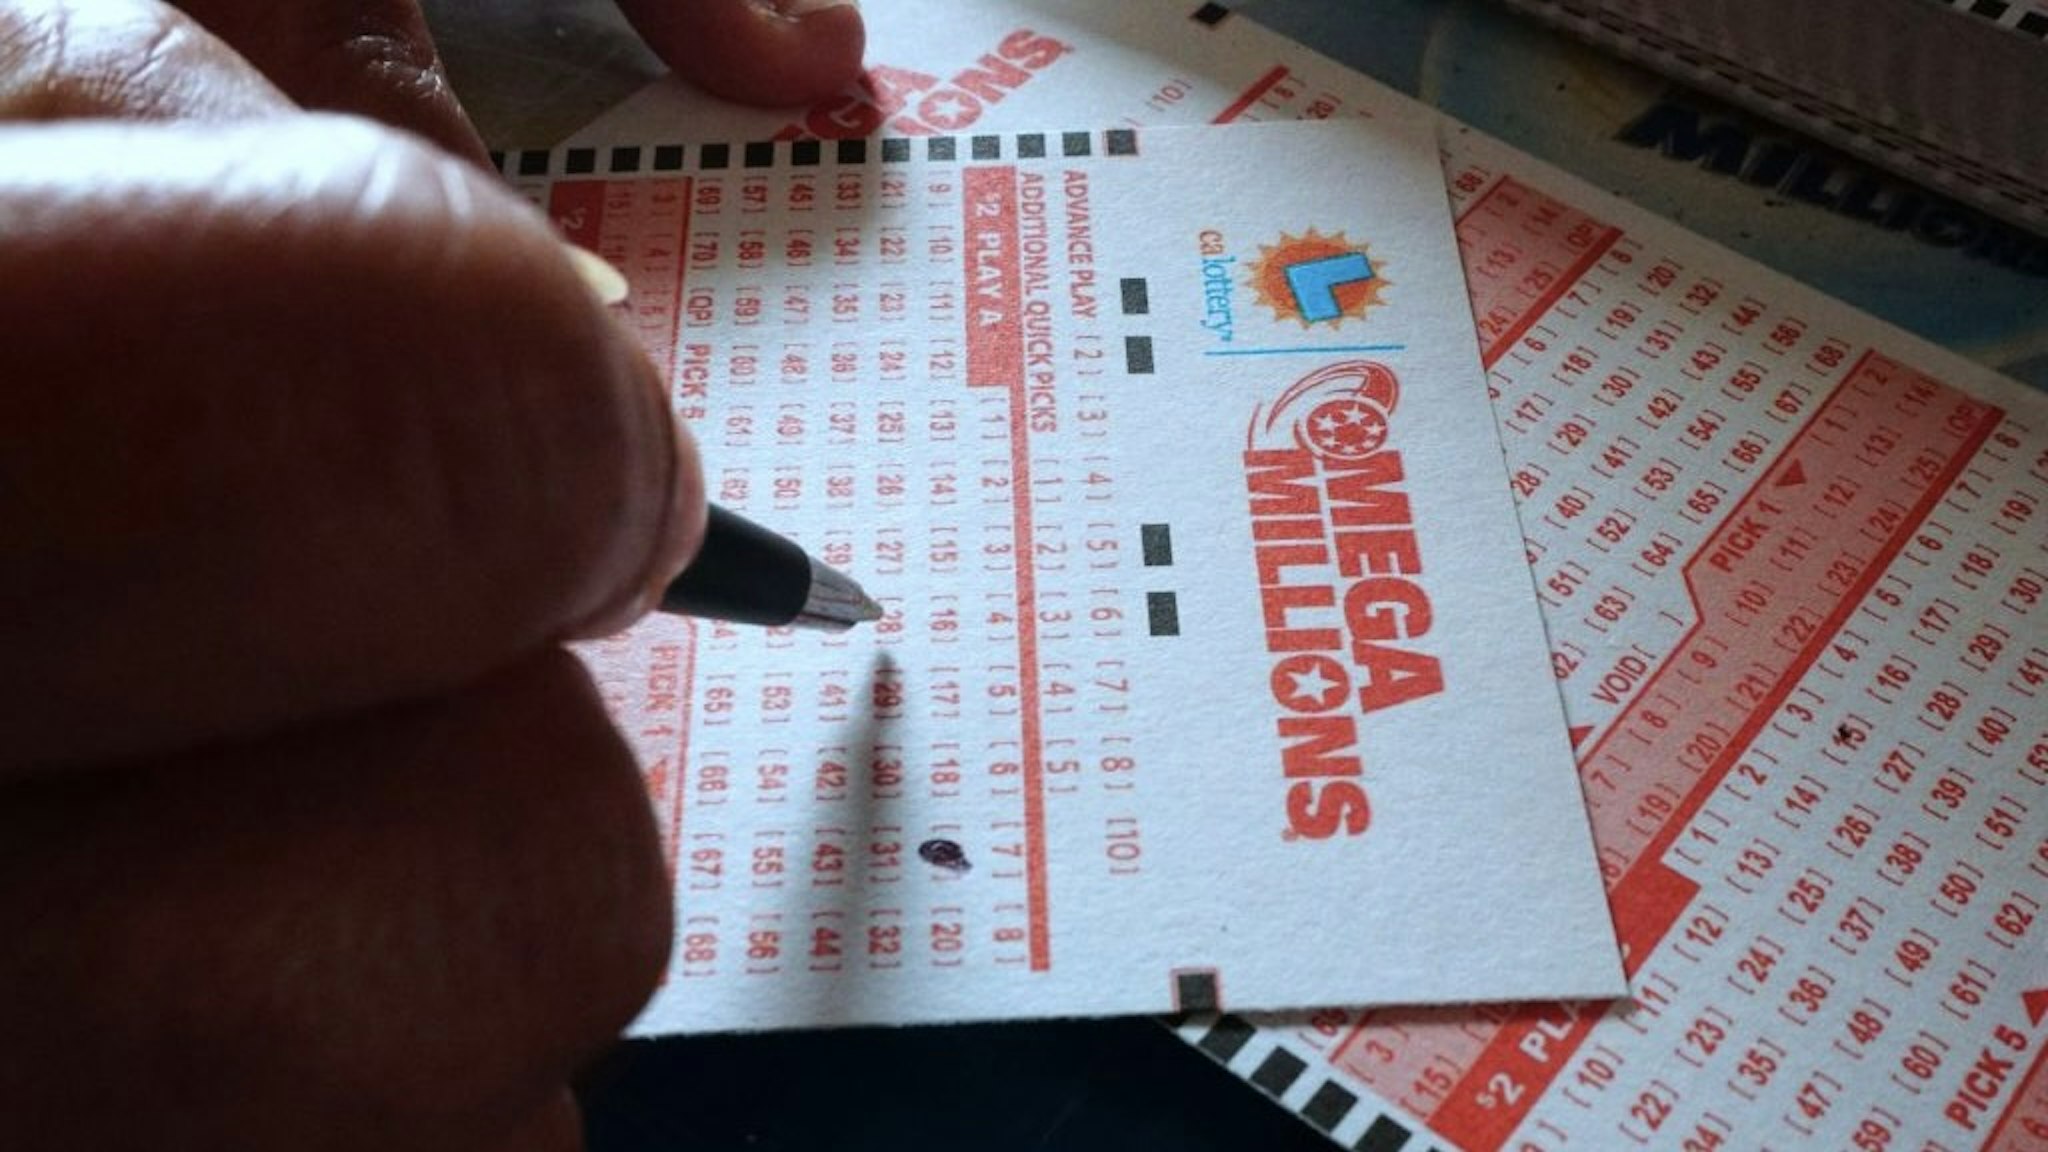 US-LIFESTYLE-LOTTERY Numbers are selected on a Mega Millions lottery ticket in Los Angeles, California on October 23, 2018. - The Mega Millions jackpot, now reaching 1.6 billion USD, will be drawn on tonight. (Photo by Frederic J. BROWN / AFP) (Photo credit should read FREDERIC J. BROWN/AFP via Getty Images) FREDERIC J. BROWN / Contributor